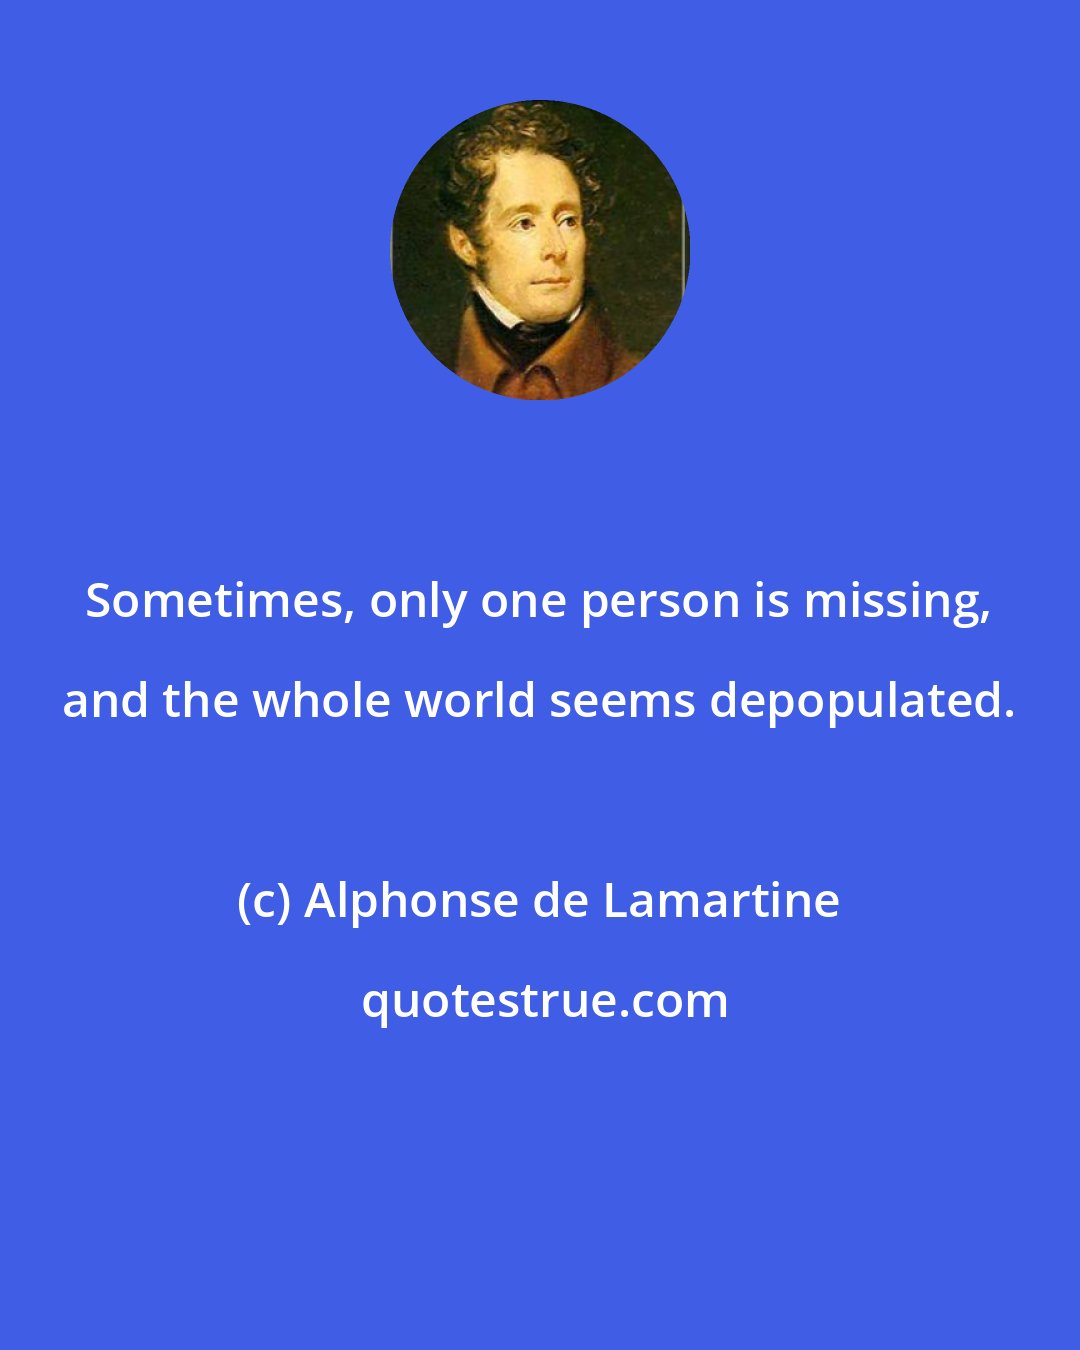 Alphonse de Lamartine: Sometimes, only one person is missing, and the whole world seems depopulated.